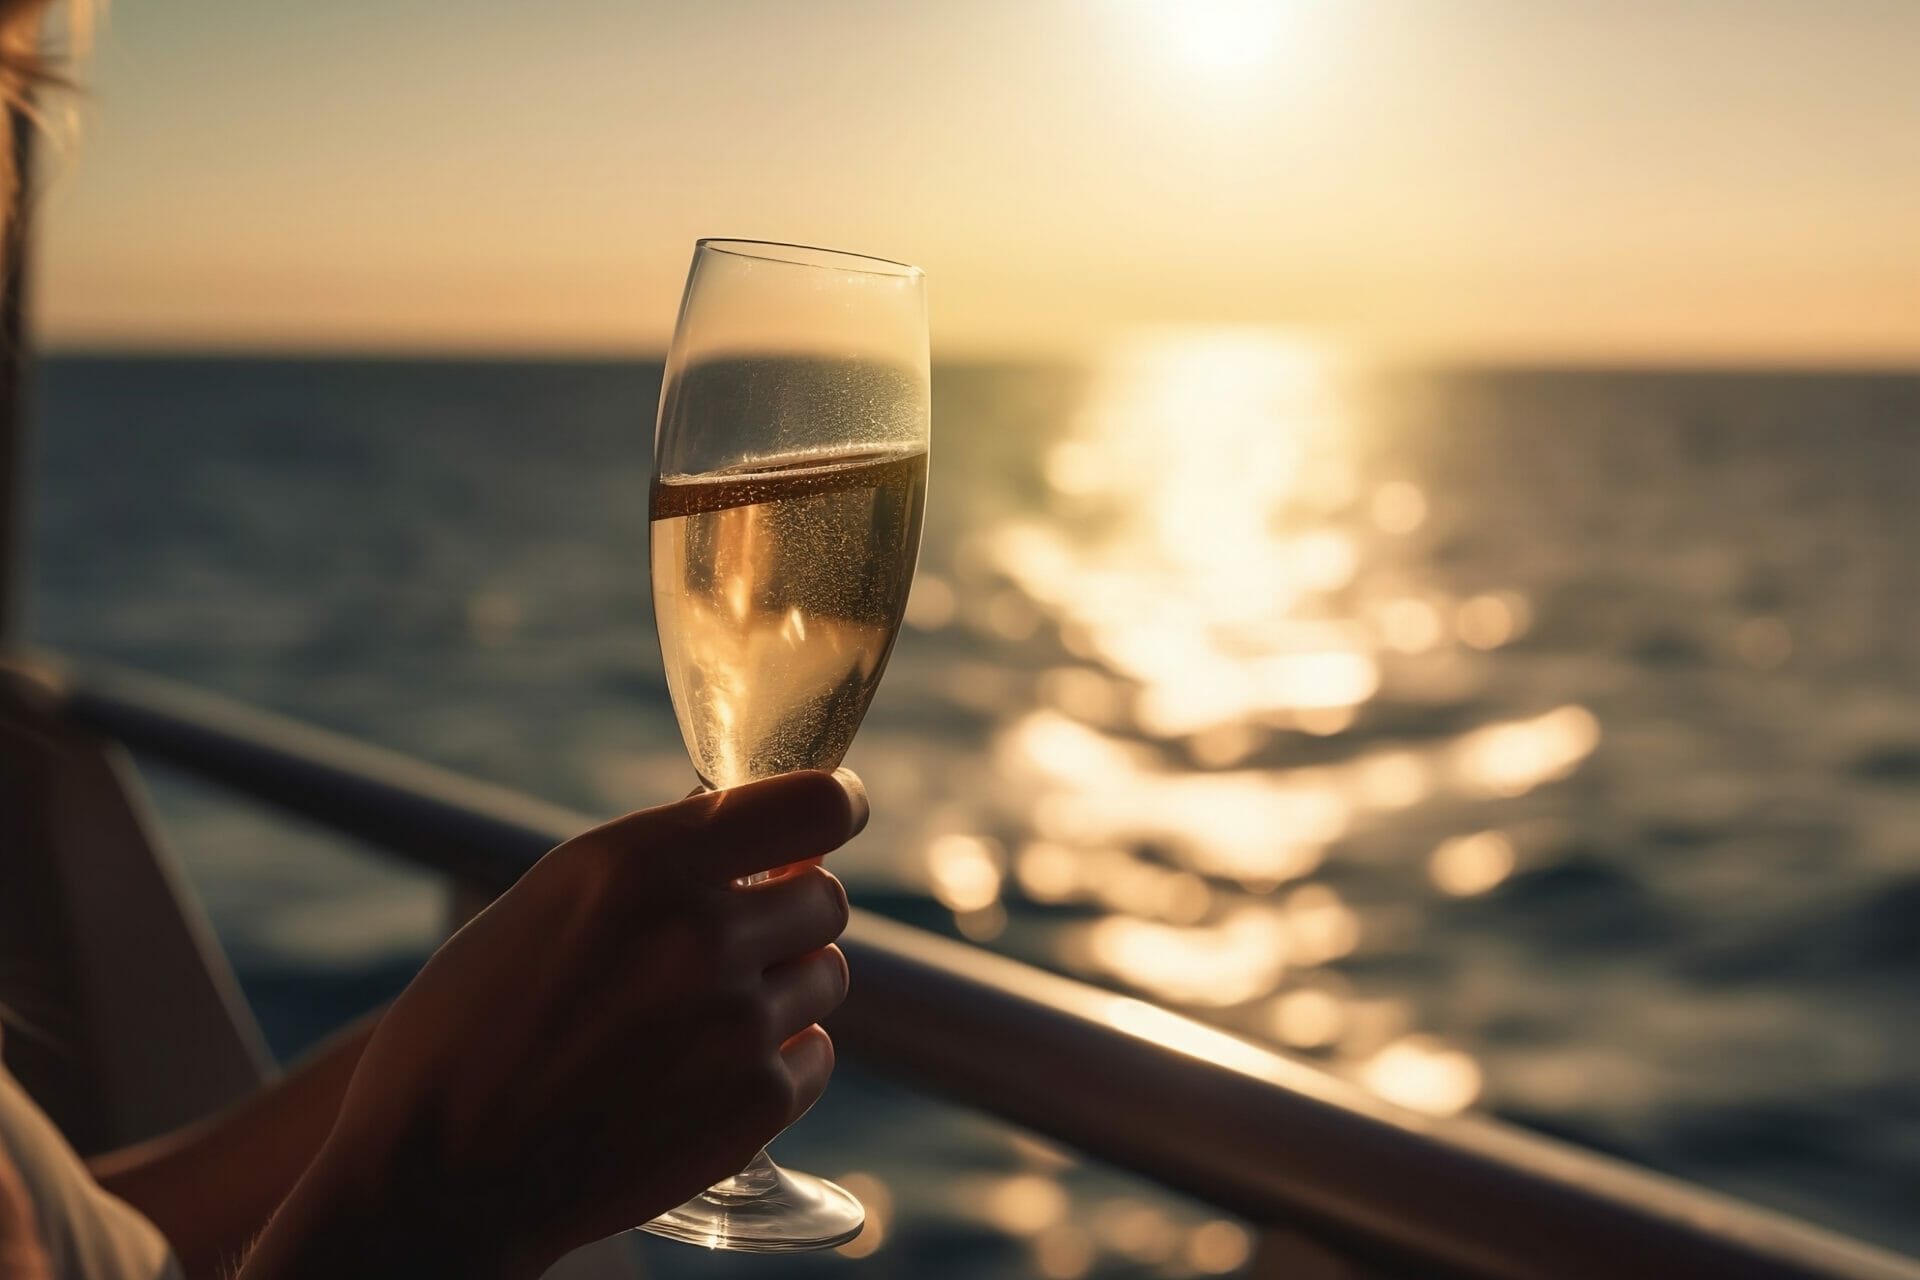 Luxury cruise ship travel champagne glass in woman's hand on balcony deck with ocean sunset or sunrise view on vacation on a yacht boat. Drinks in on a cruise holiday destination.